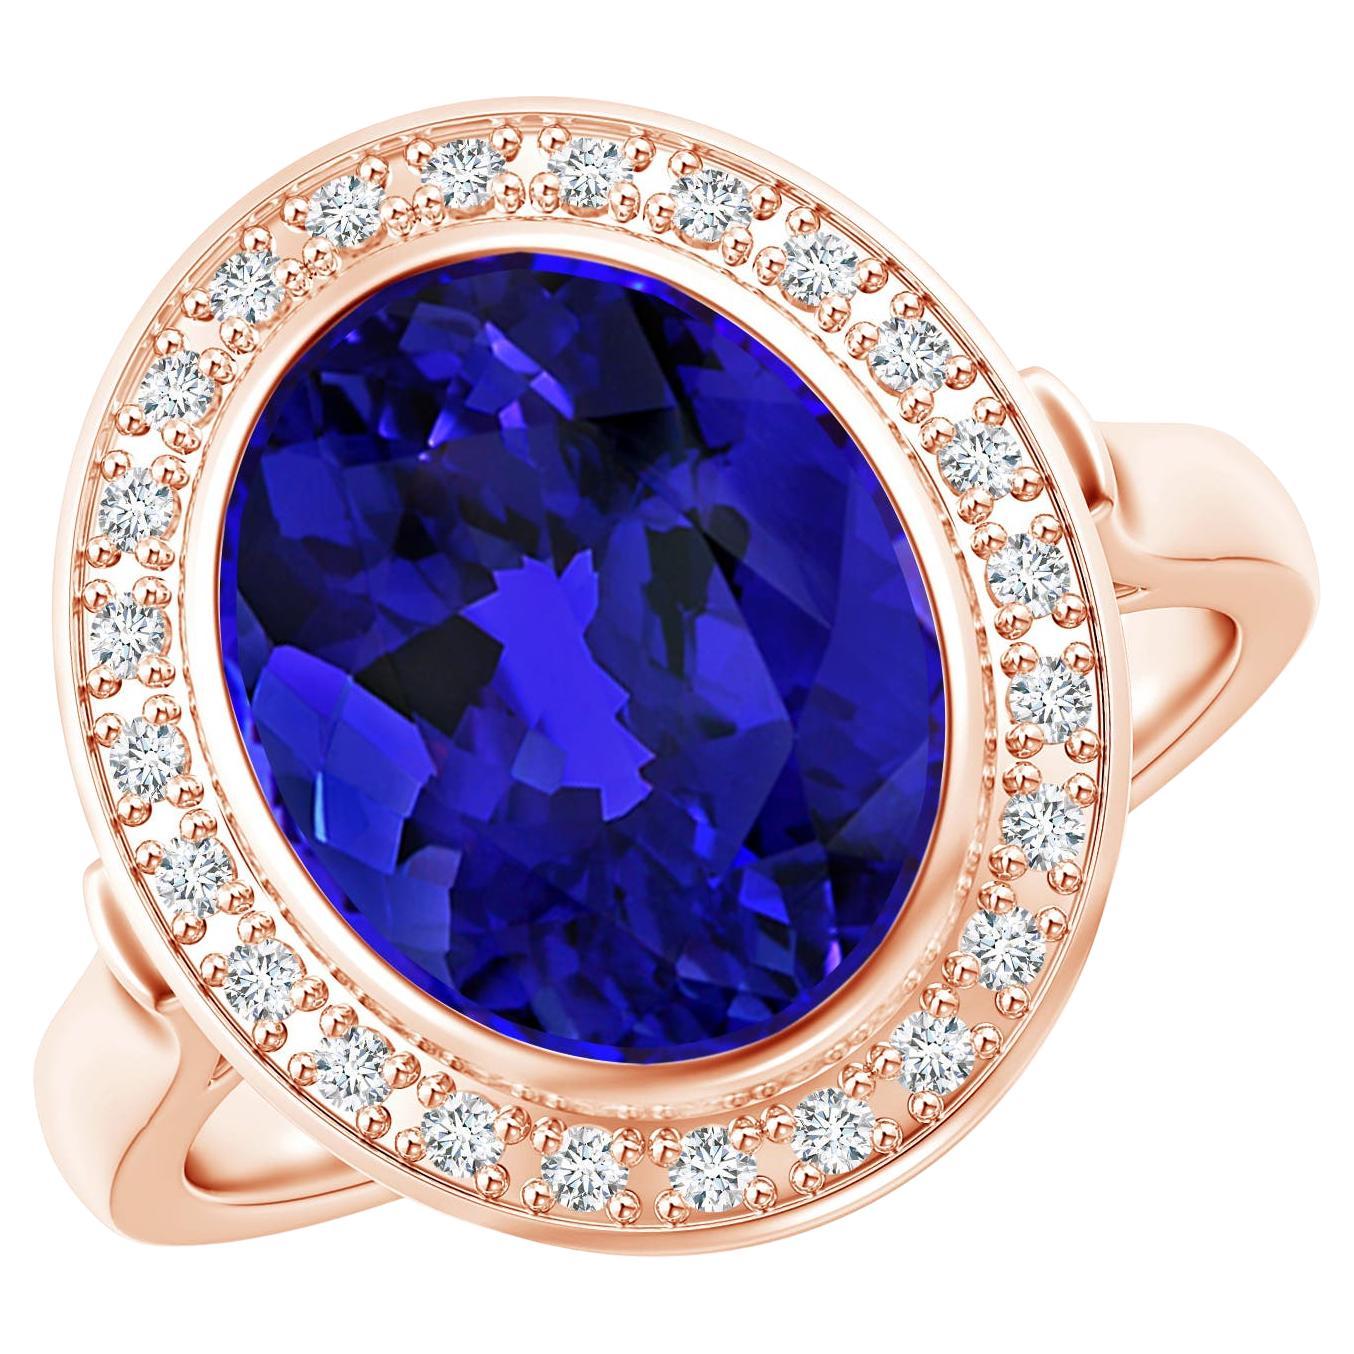 For Sale:  Angara GIA Certified & Appraised Natural Tanzanite Halo Ring in Rose Gold